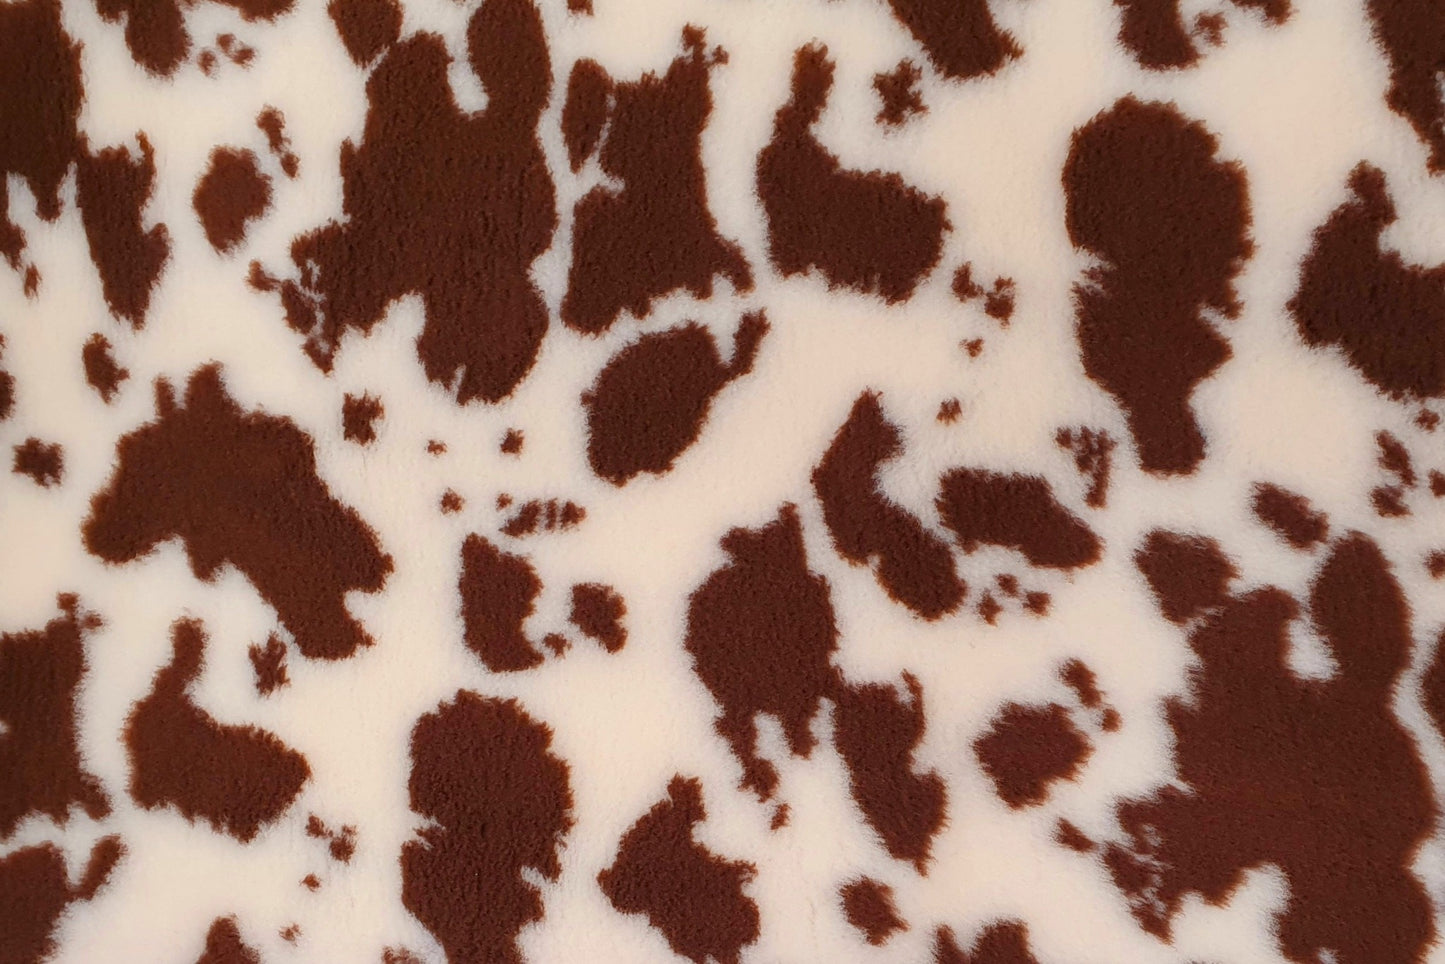 Vet Bed - Rubber Backed - Brown and Cream Cow Print